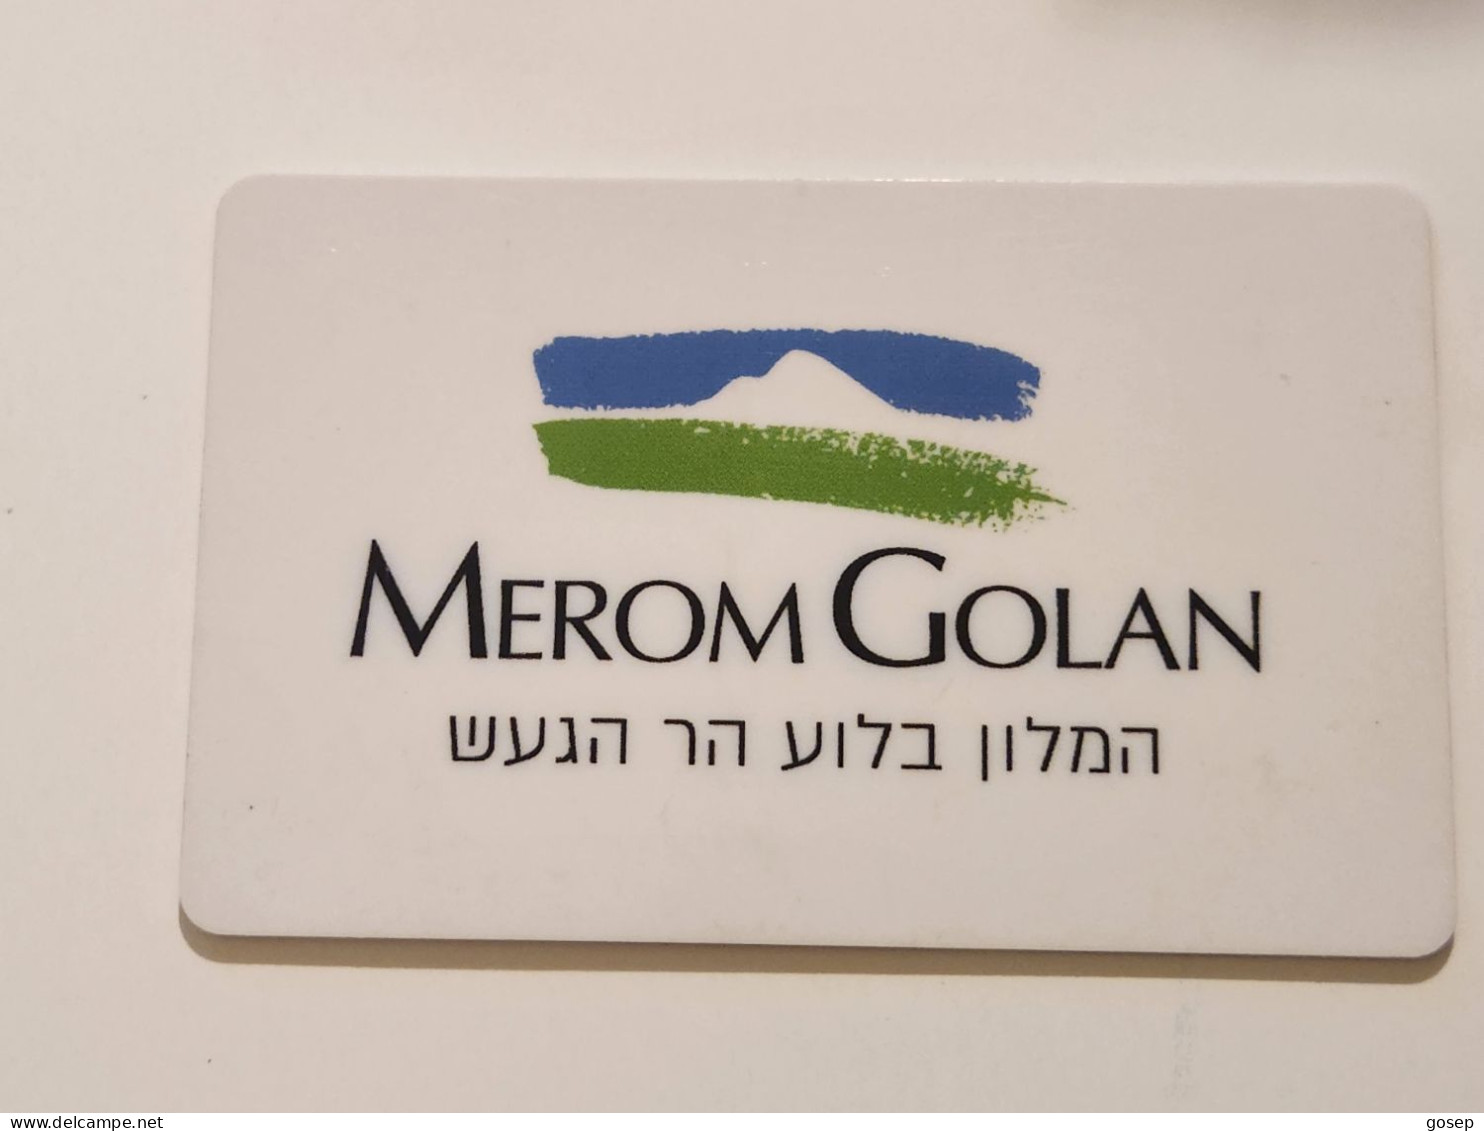 ISRAEL-MEROM GOLAN-The Hotel Is In The Crater Of The Volcano-HOTAL-KEY CARD-(1075)(?)GOOD CARD - Hotelsleutels (kaarten)